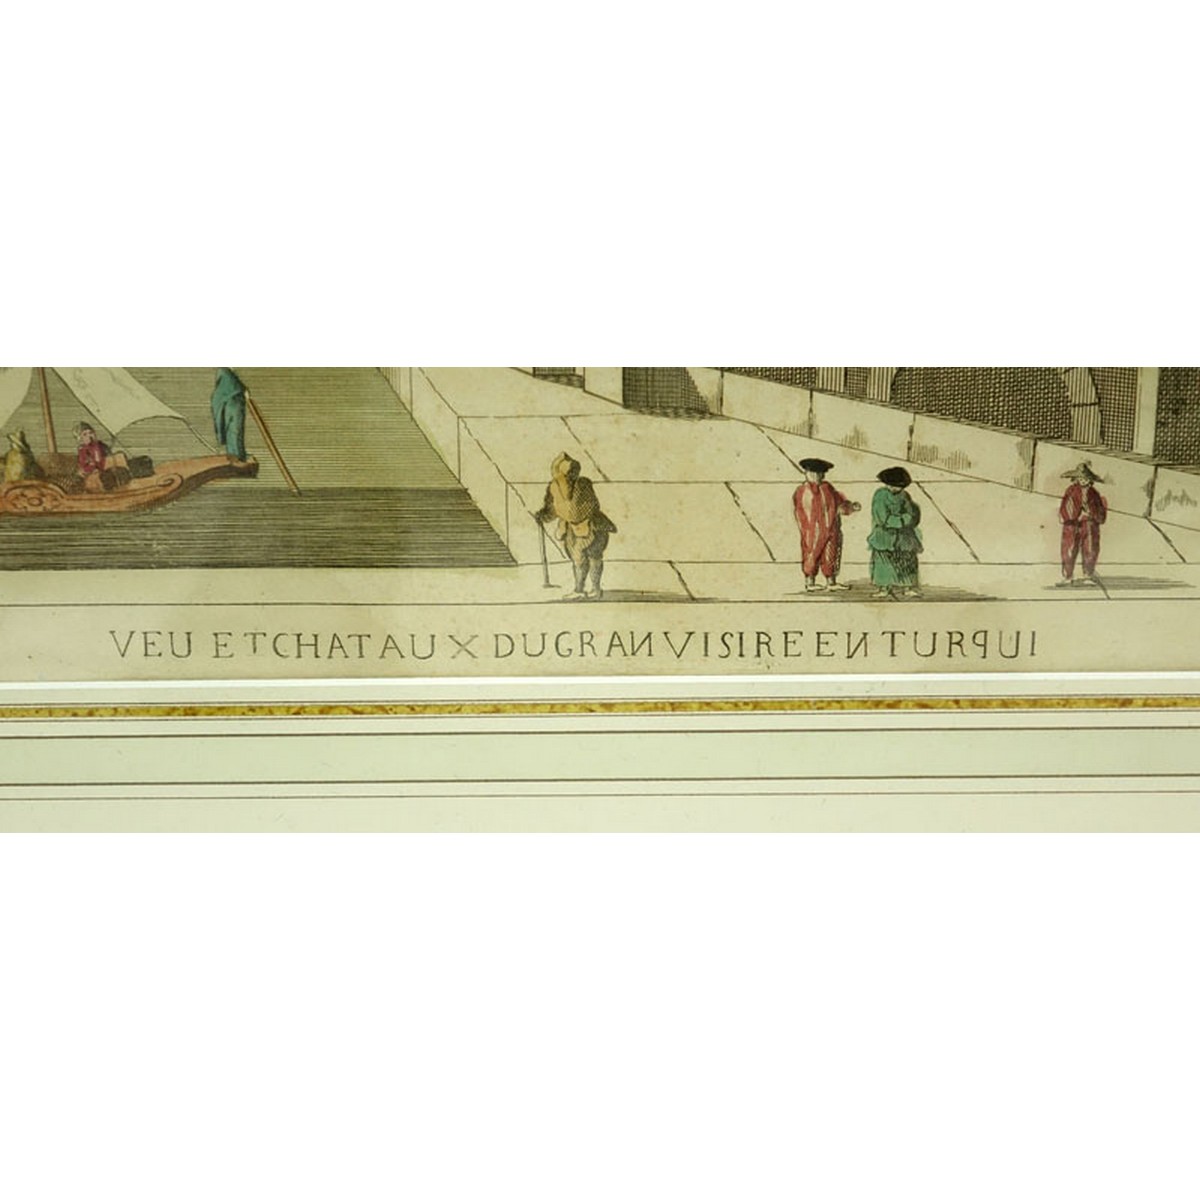 17/18th Century French School Color Engraving, Dugran Visire en Turqui. Condition: crease in the center, stains, foxing all consistent with age.